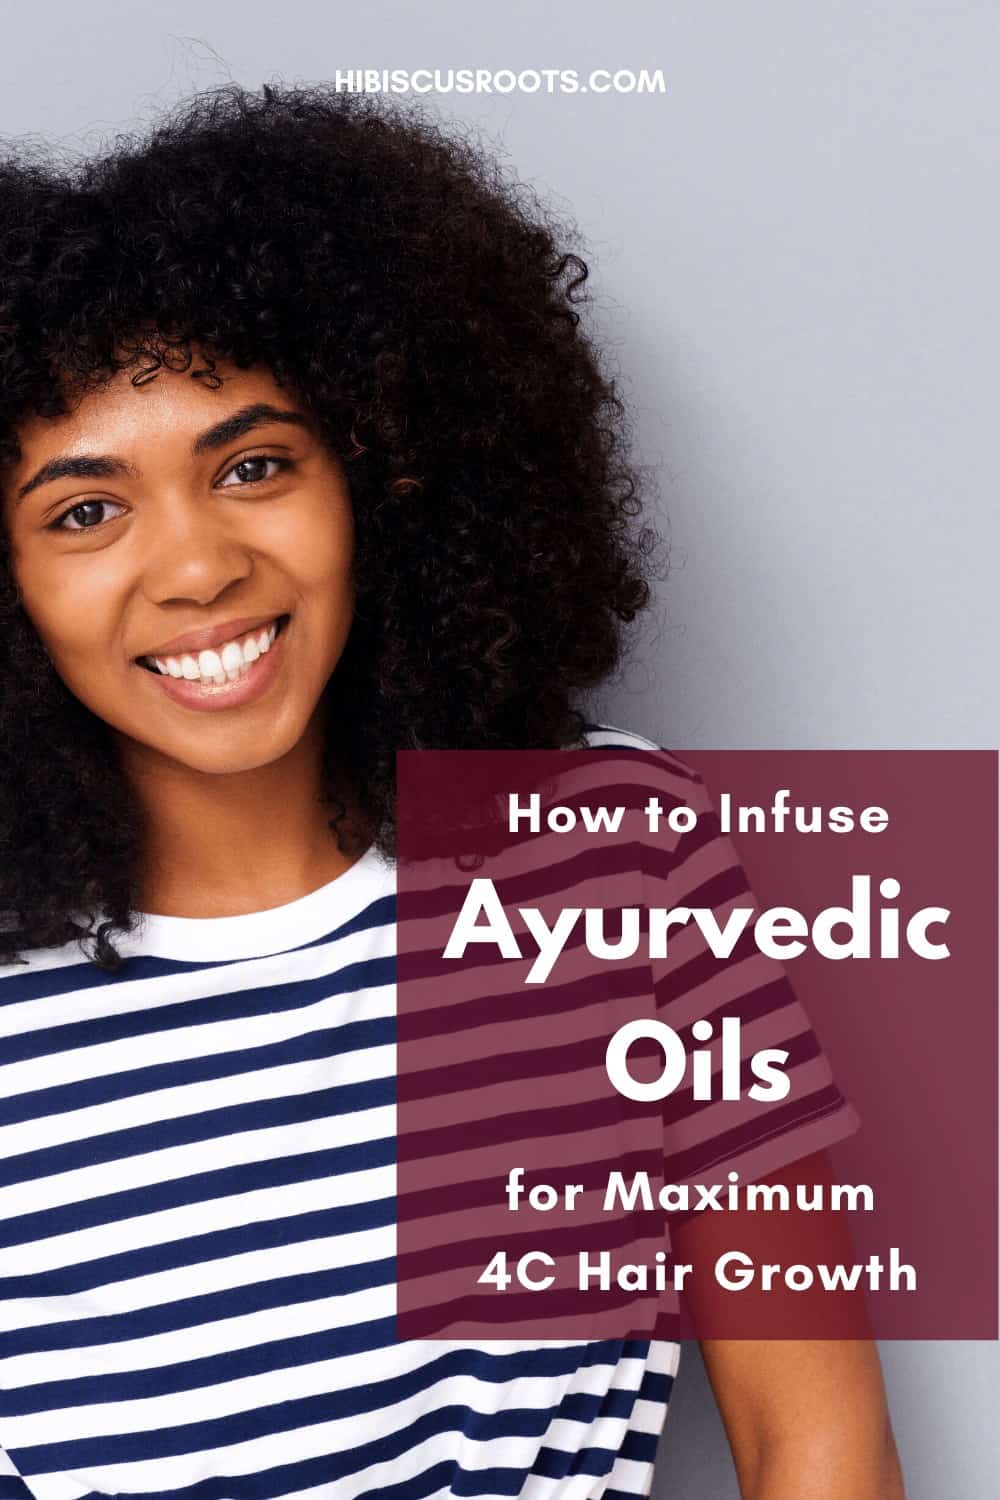 Ayurvedic Hair Growth Oil Recipes to Start Infusing NOW!